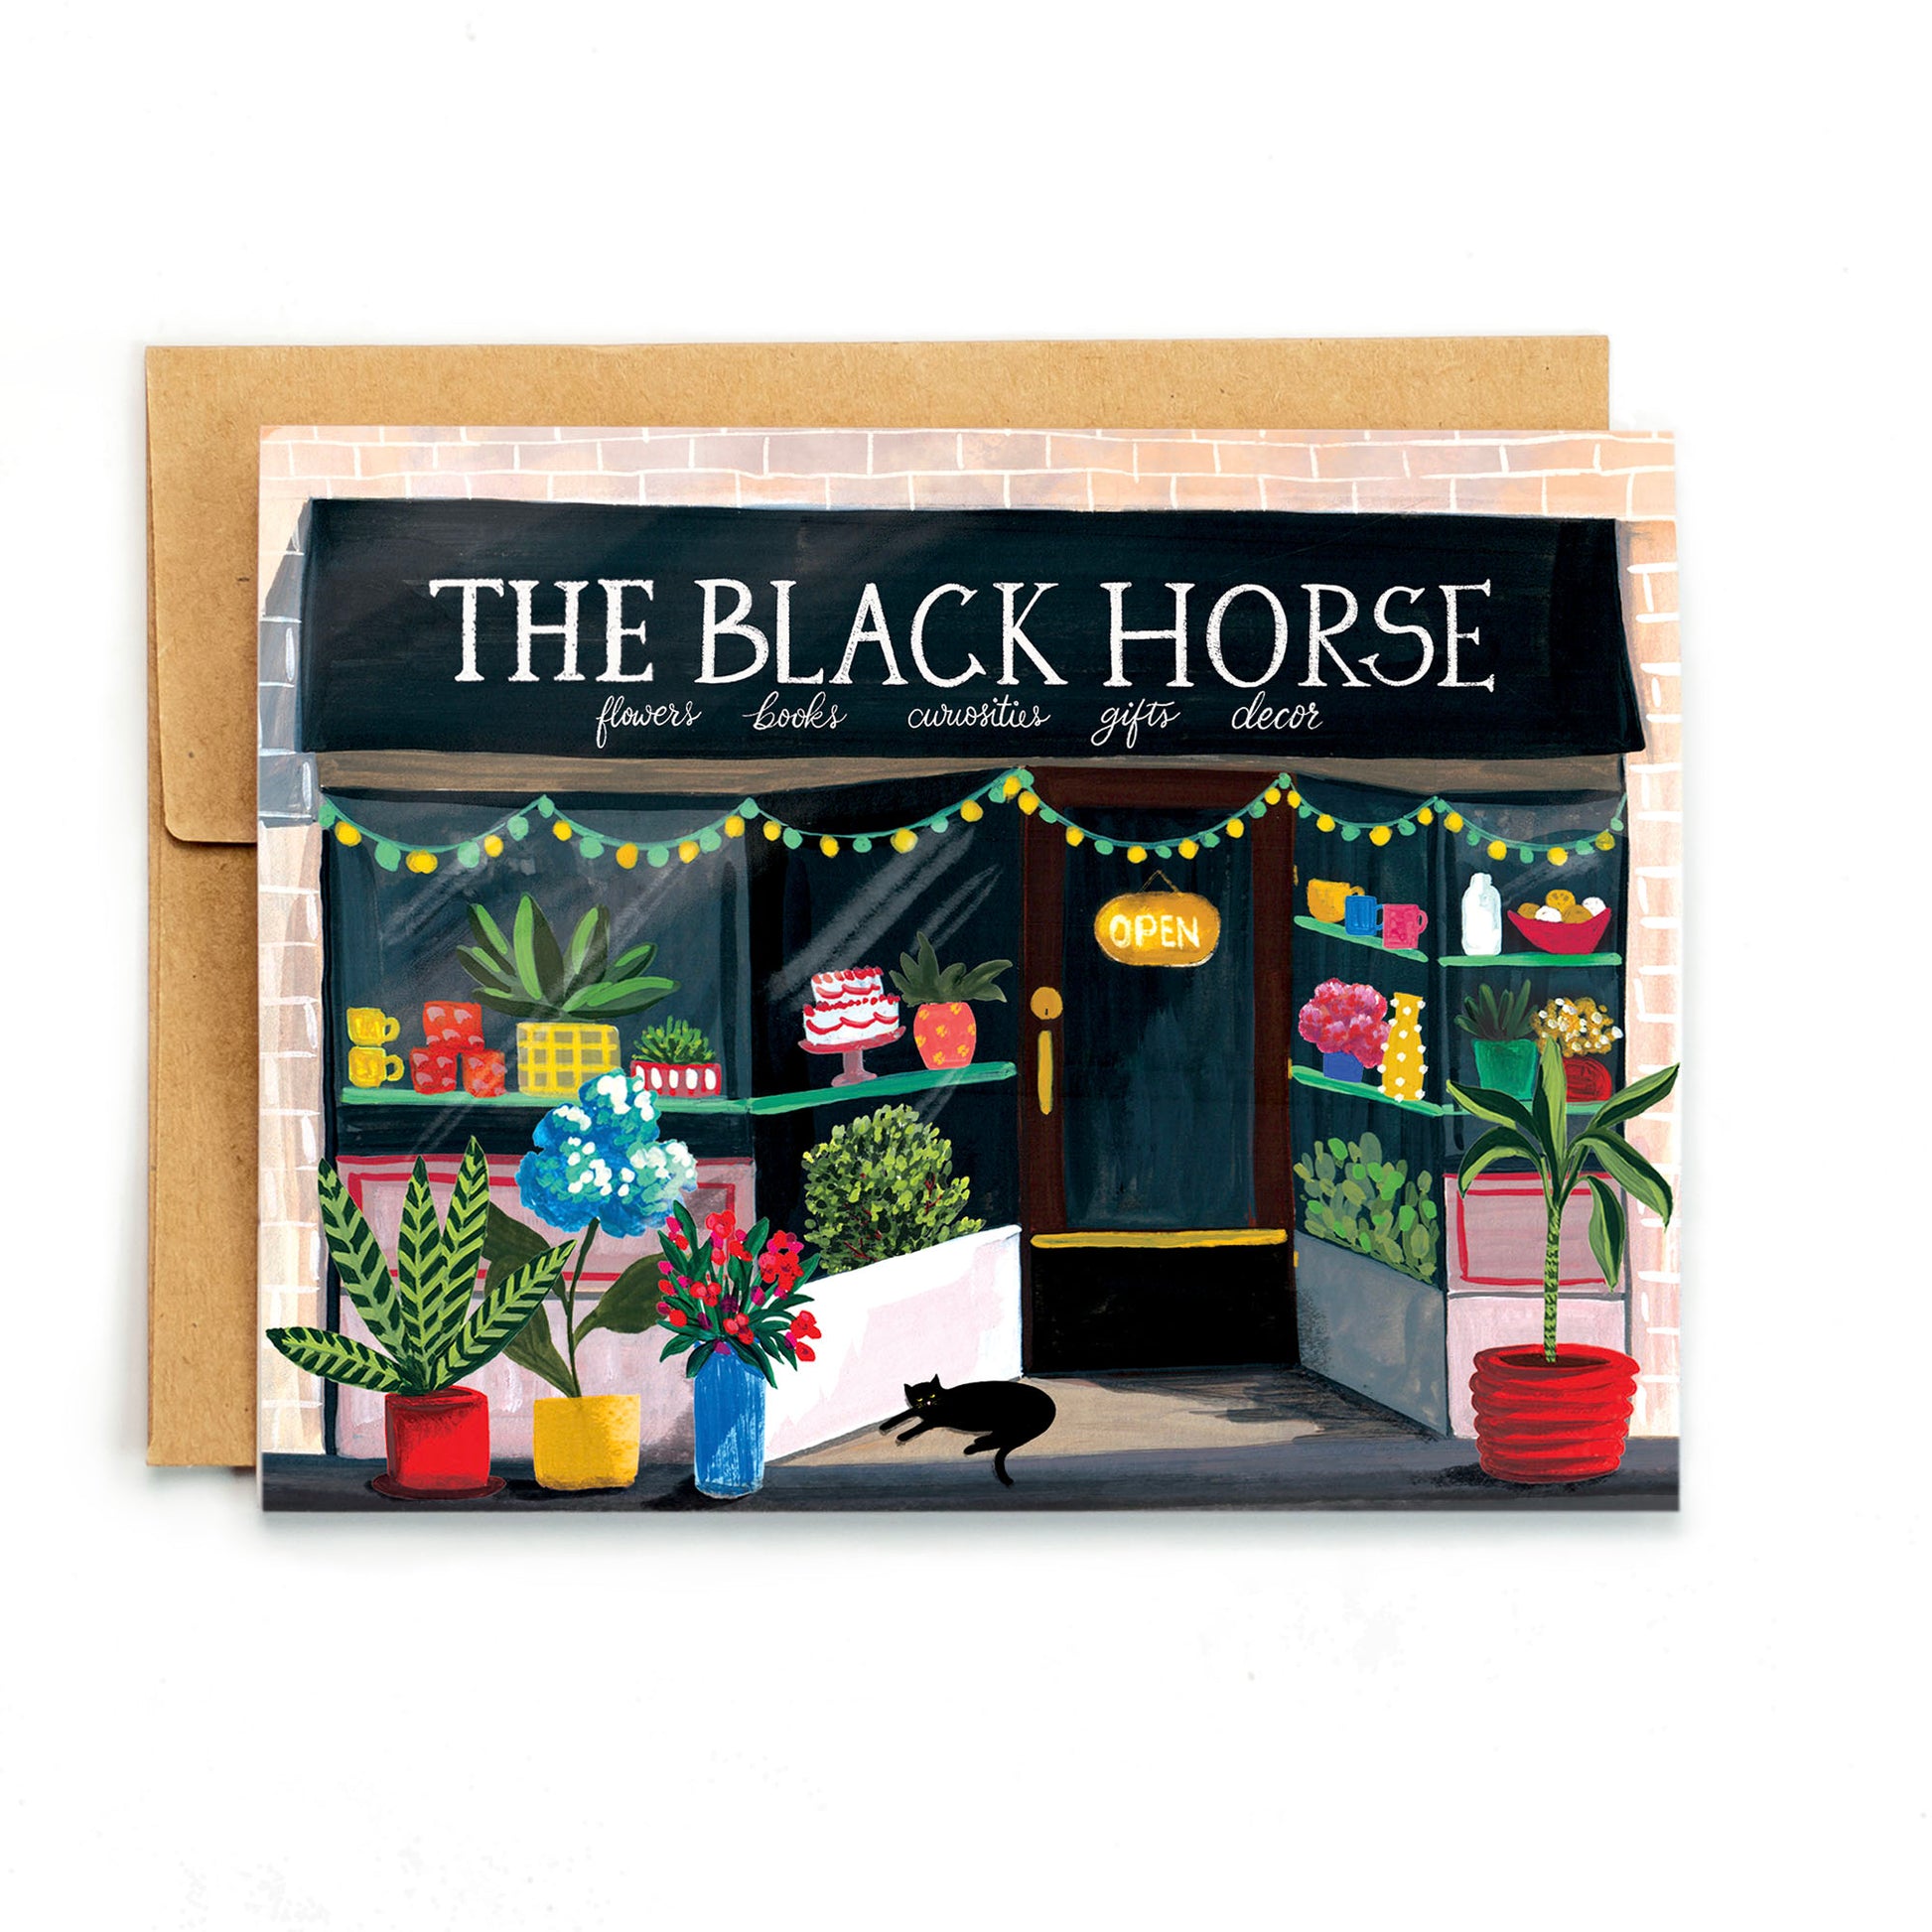 a painting of a black horse store front